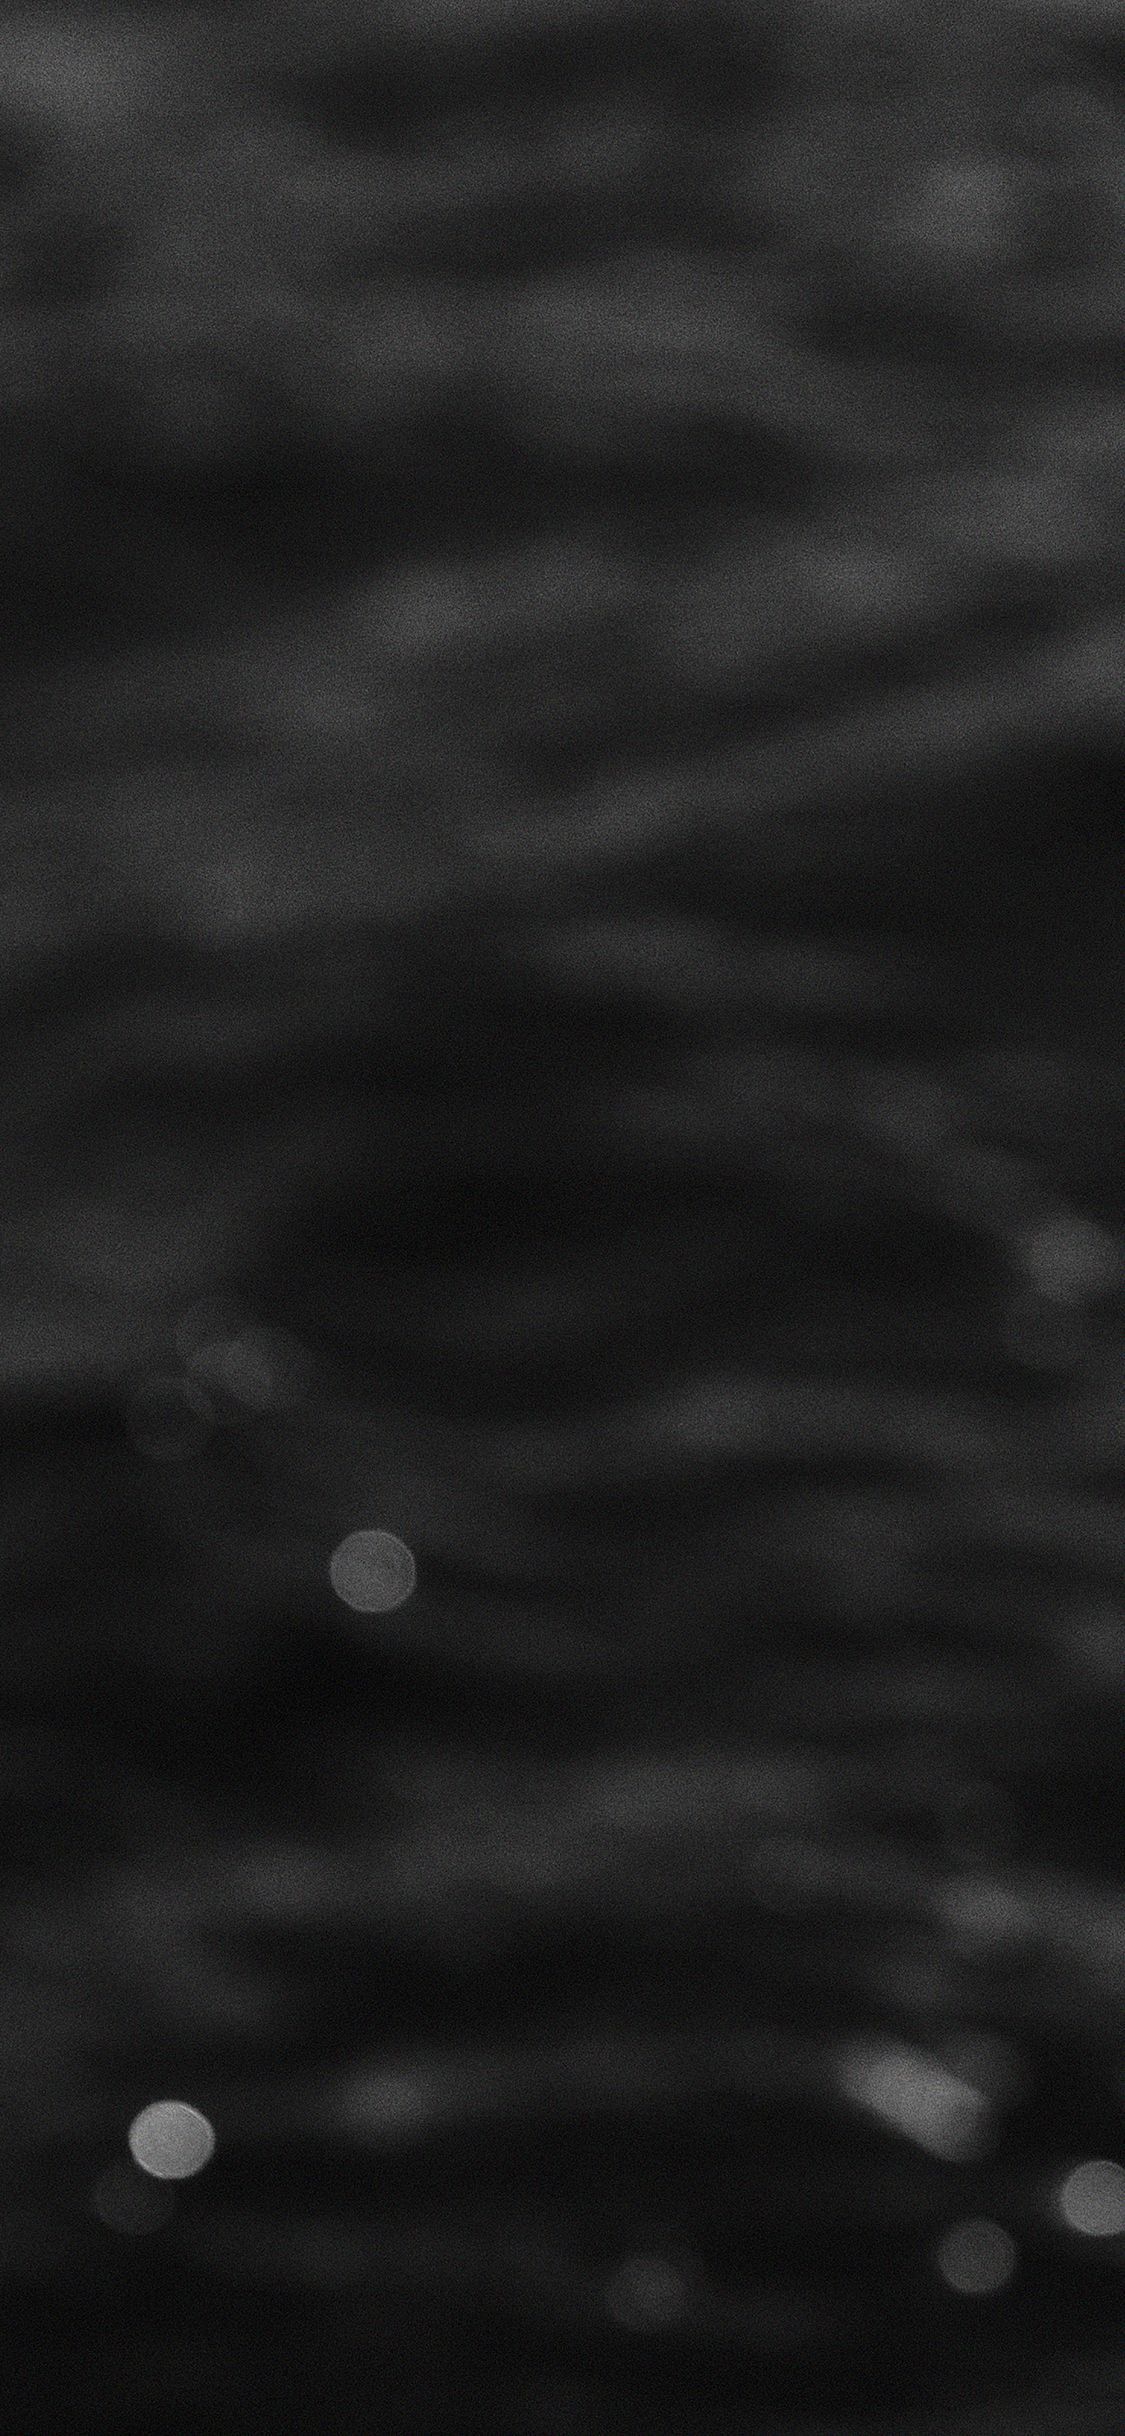 A black and white photo of water - Blurry